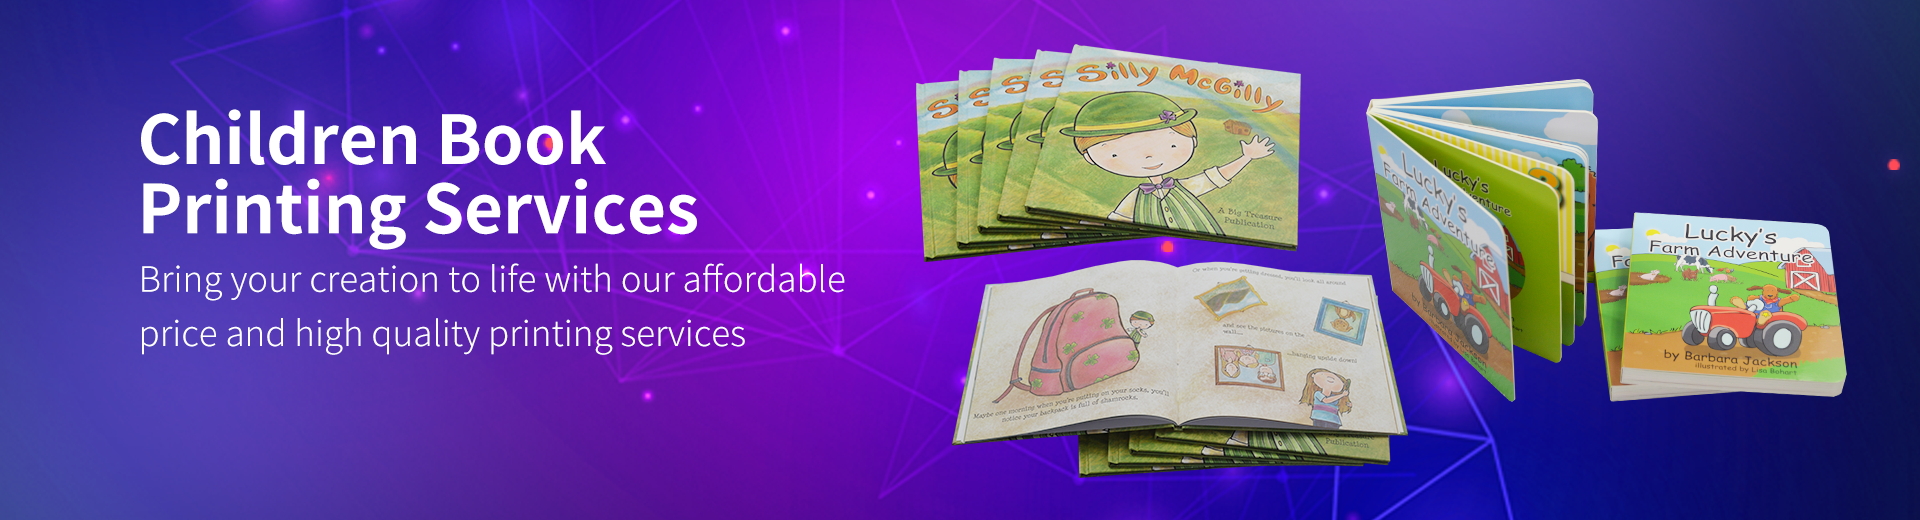 High-Quality Professional Children's Book Printing Services Worldwide